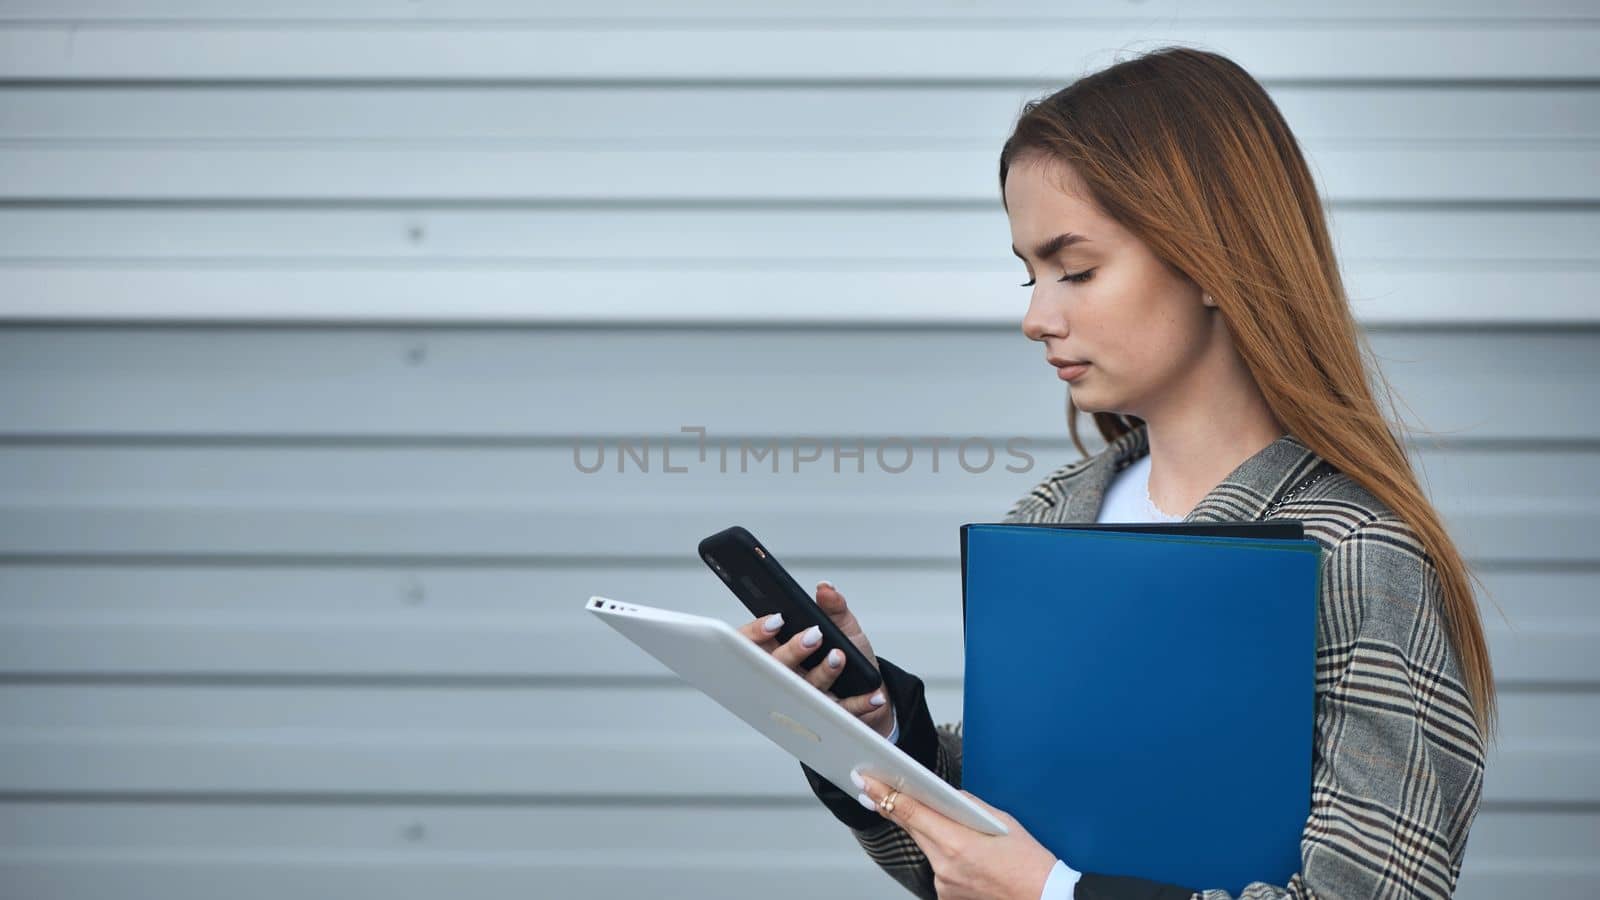 A young student works with a tablet and a phone